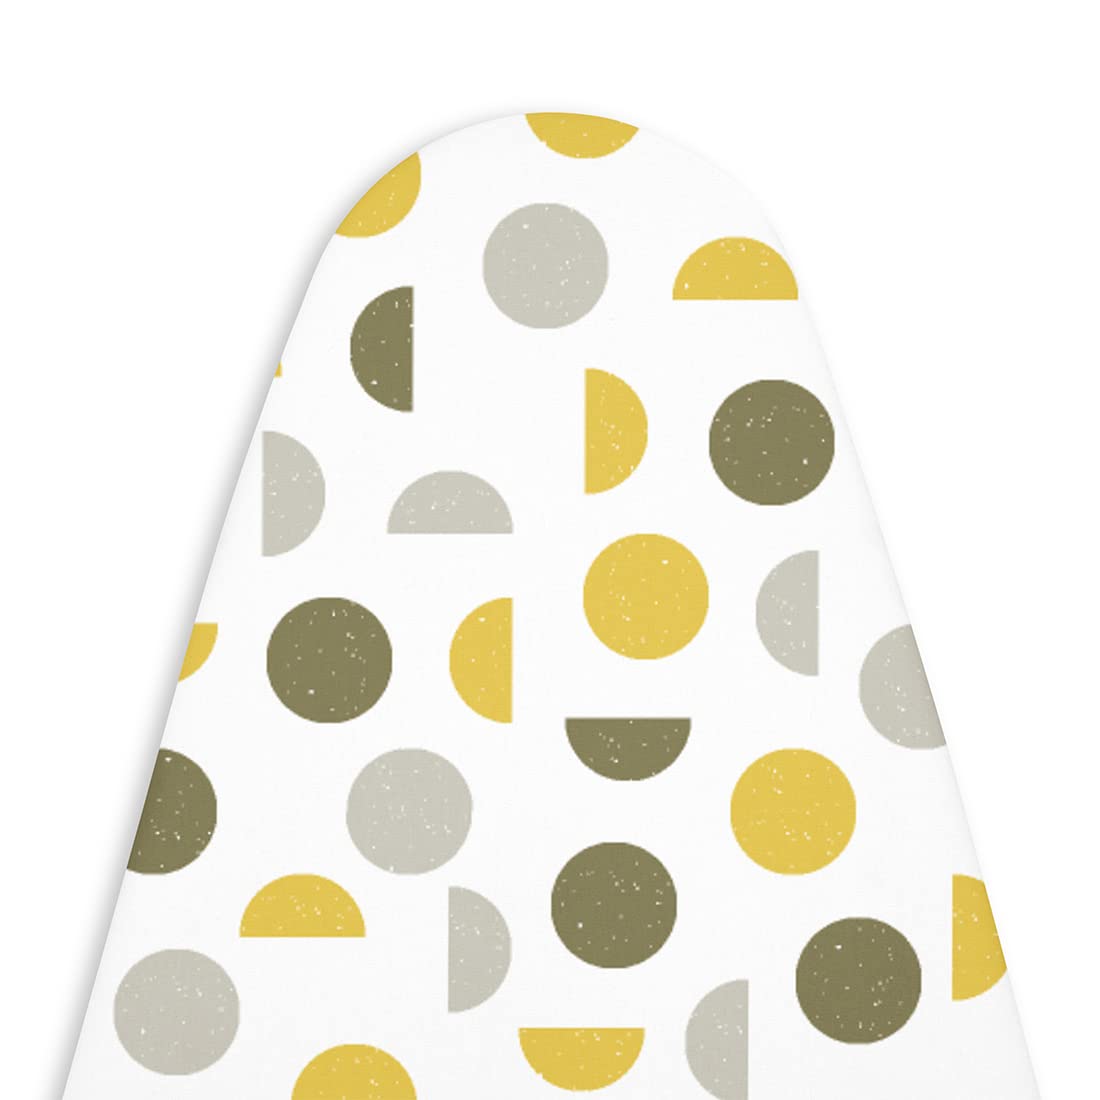 Encasa Homes Ironing Board Cover with 3mm Thick Felt Pad for Steam Press (Fits Standard Large Boards of 125x39 cm) Heat Reflective, Scorch & Stain Resistant, Printed - Yellow Moon